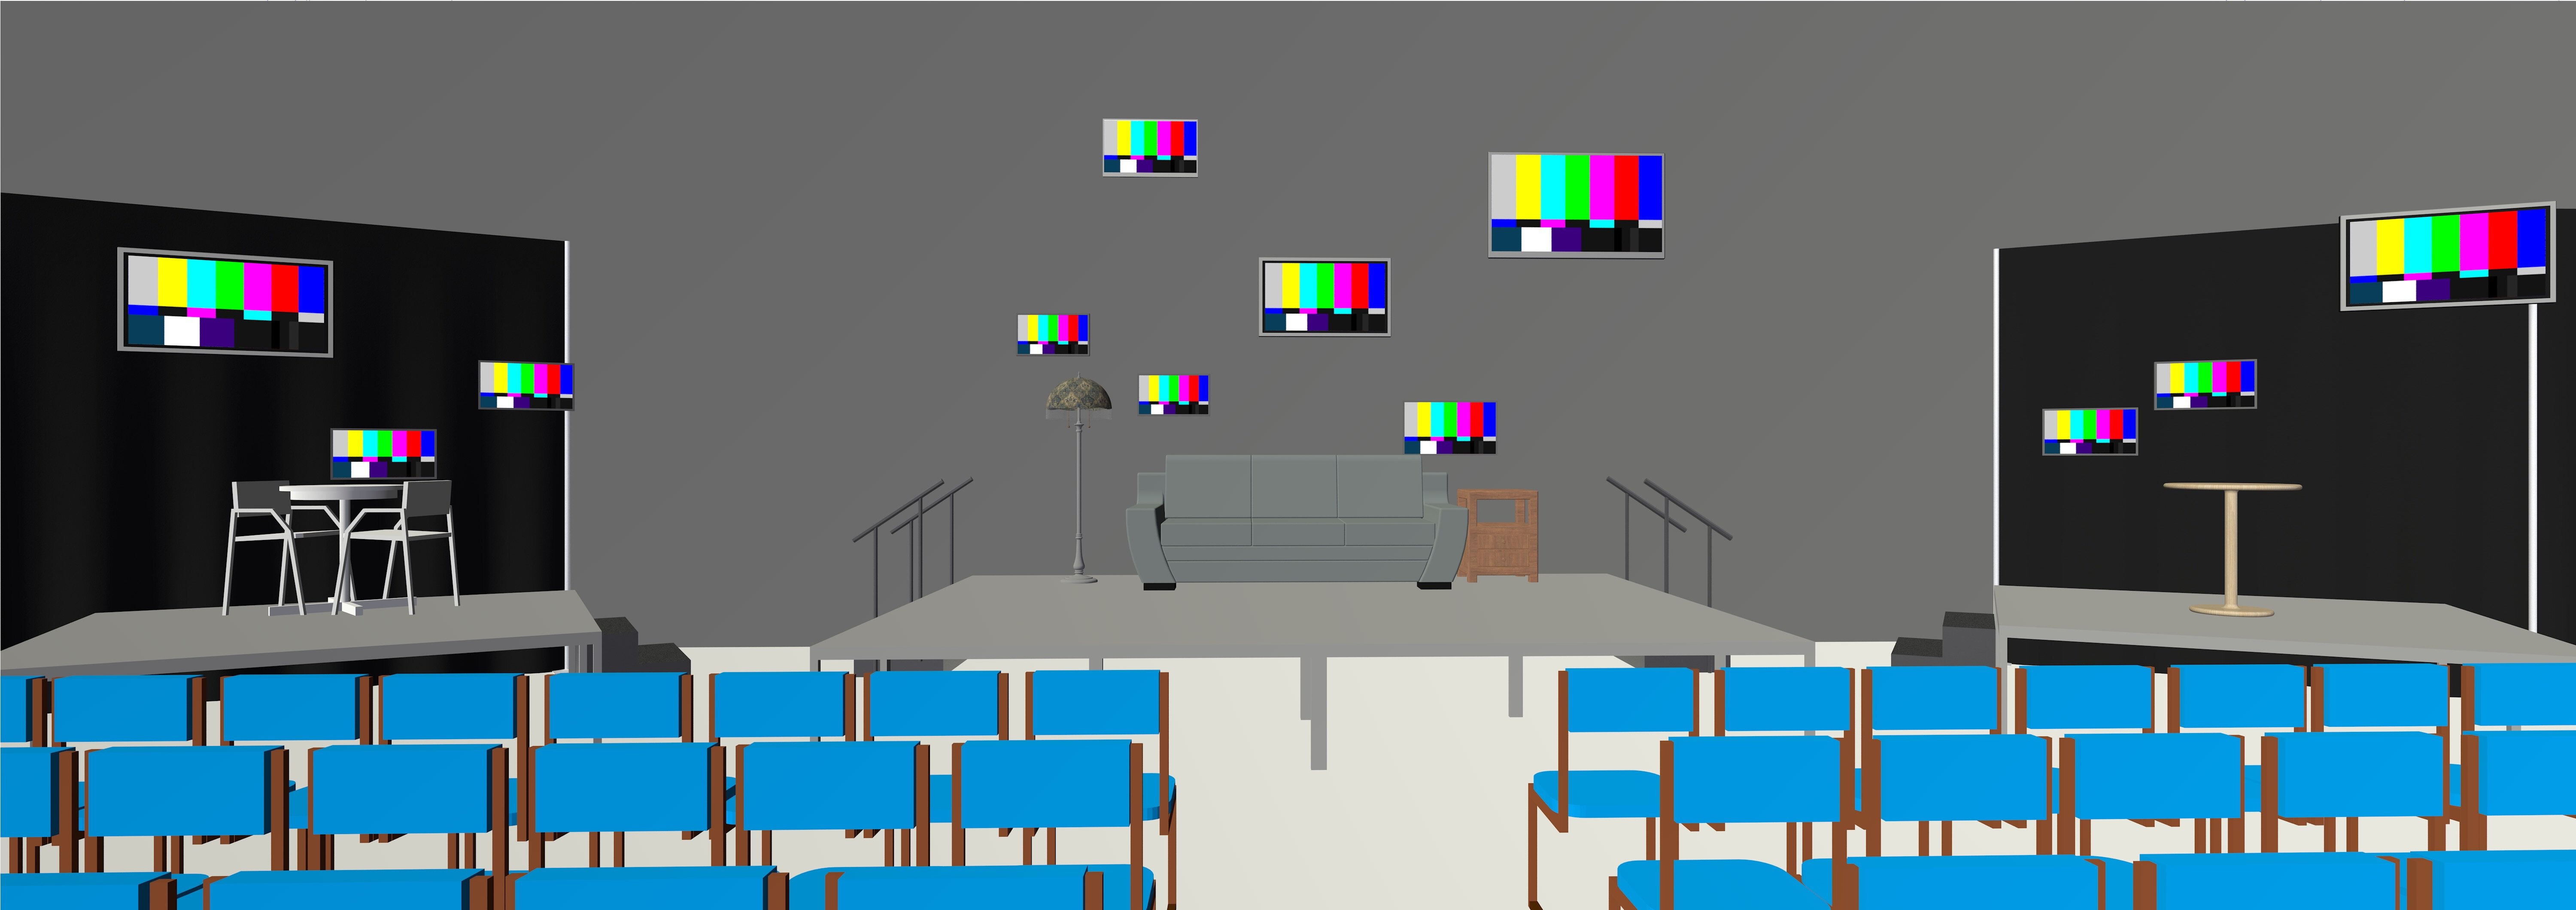 Computer rendering of the set design, including the 12 video screens.